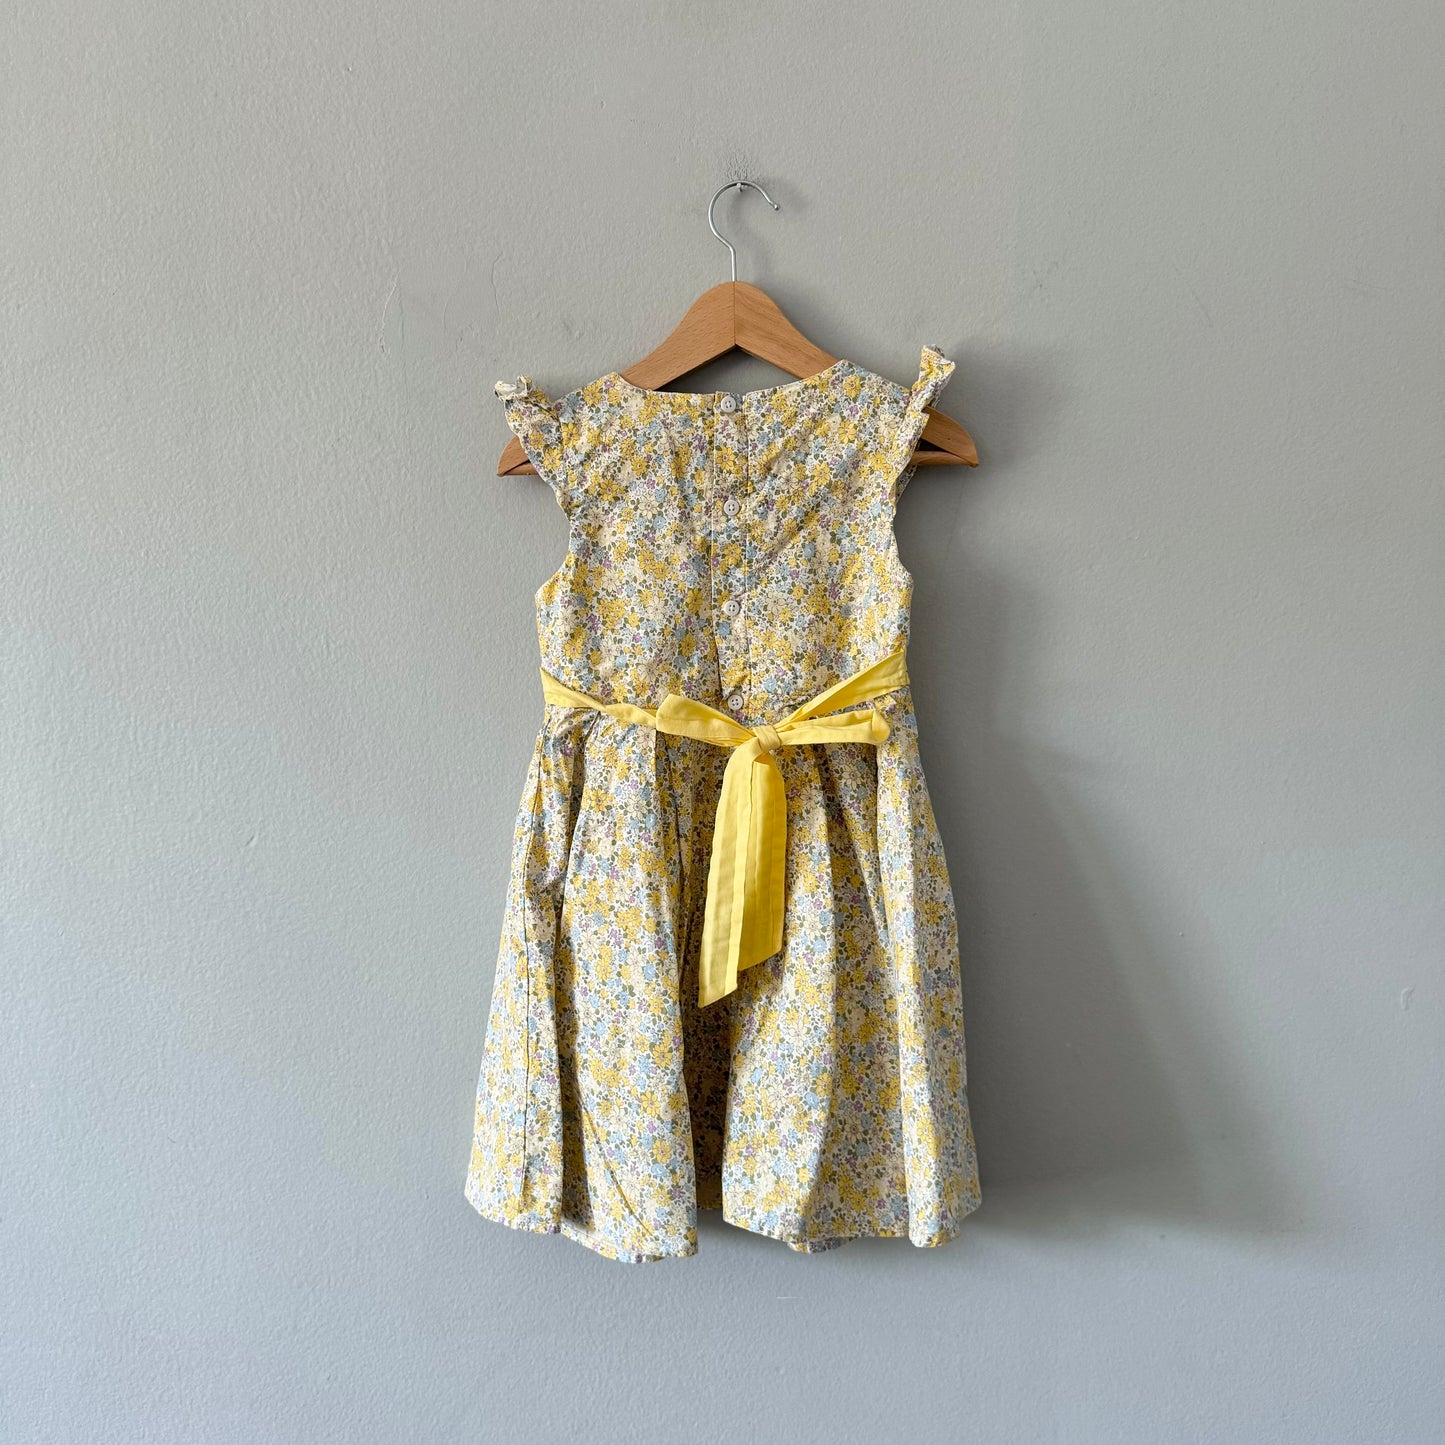 OMG! / Yellow floral dress / 3T